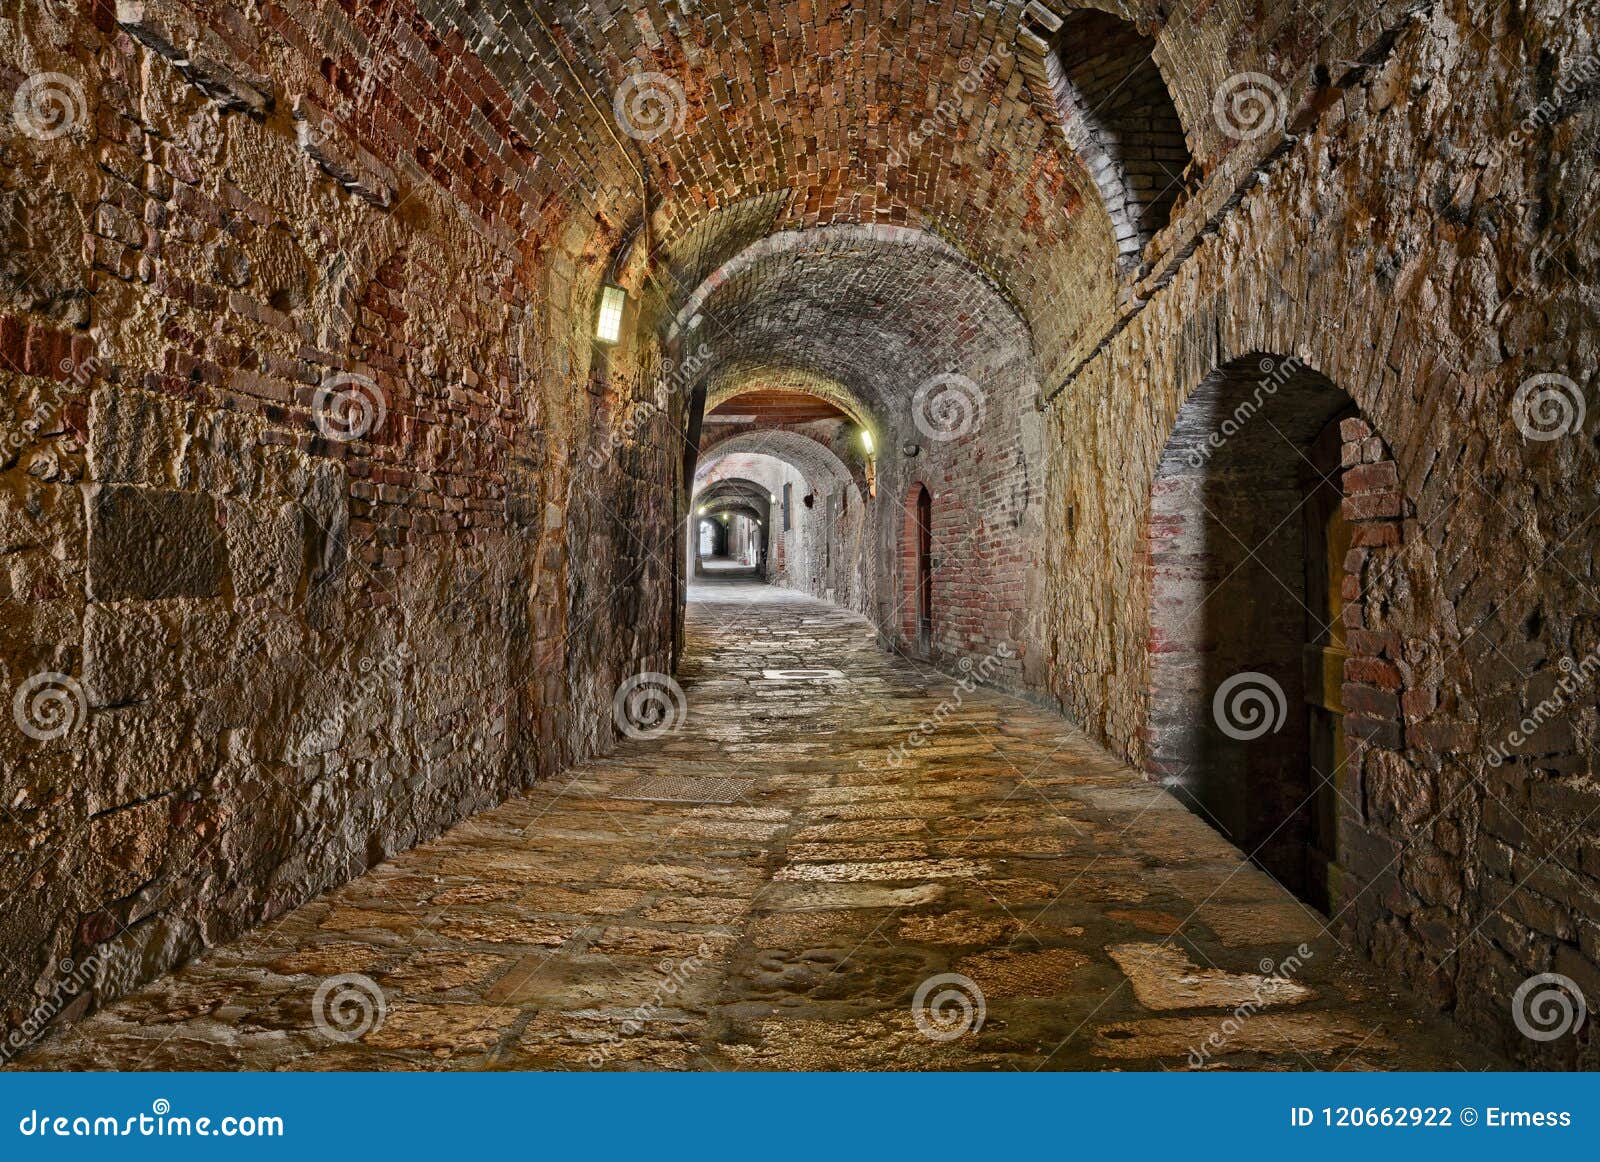 colle di val d`elsa, siena, tuscany, italy: the medieval alley v